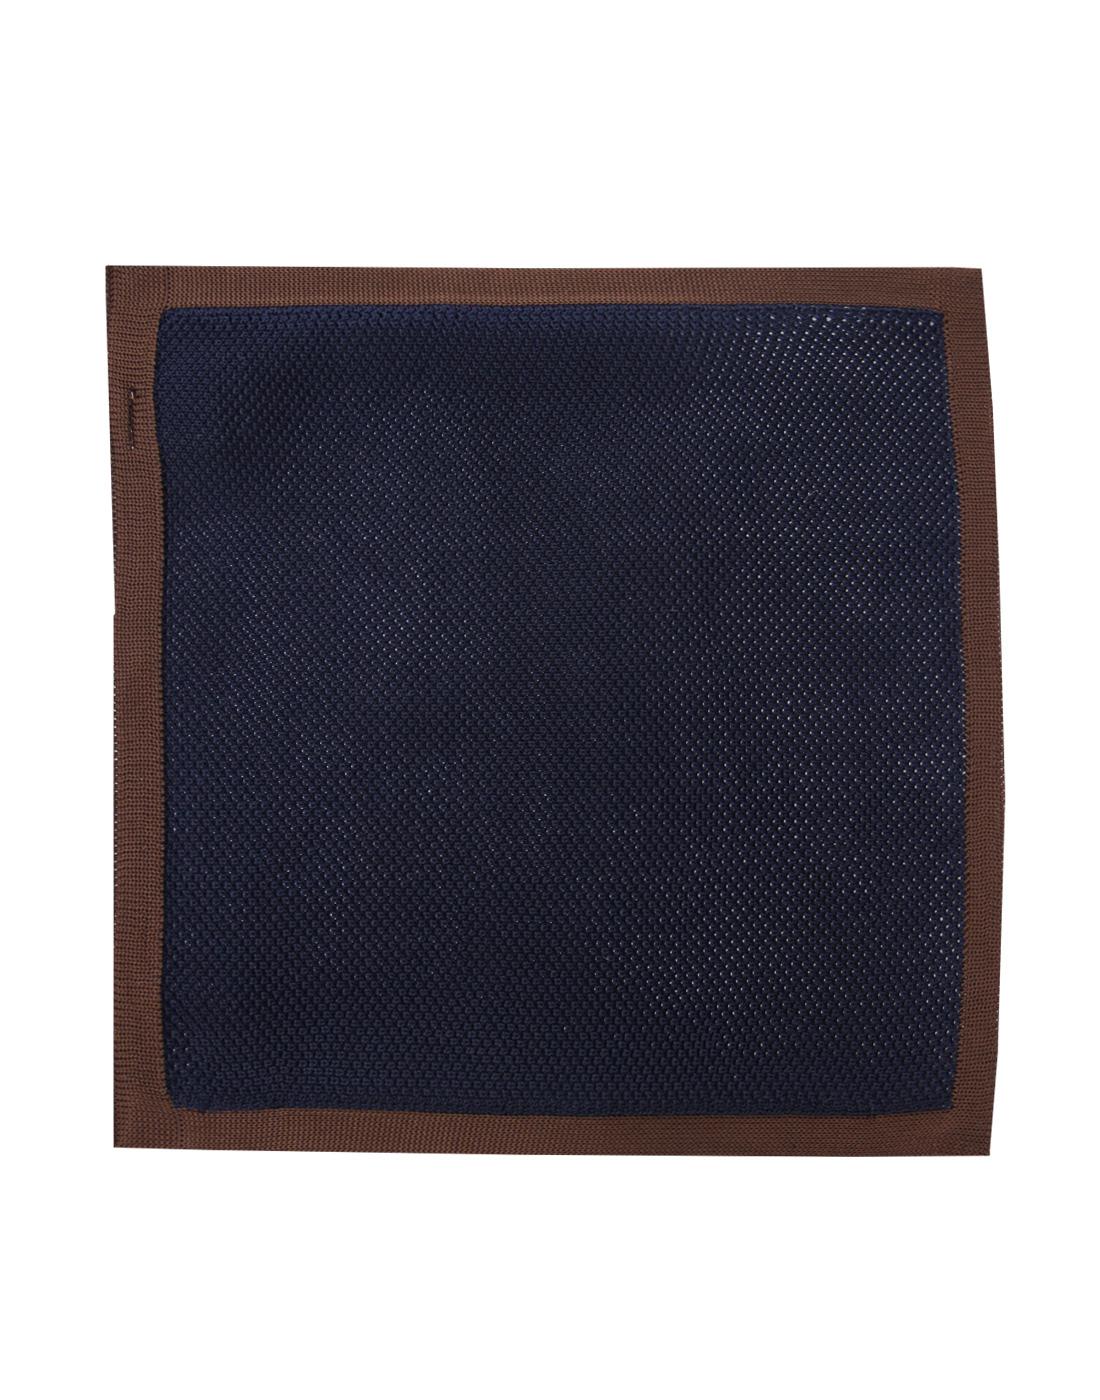 GIBSON LONDON Mod Knitted Pocket Square NAVY/BROWN